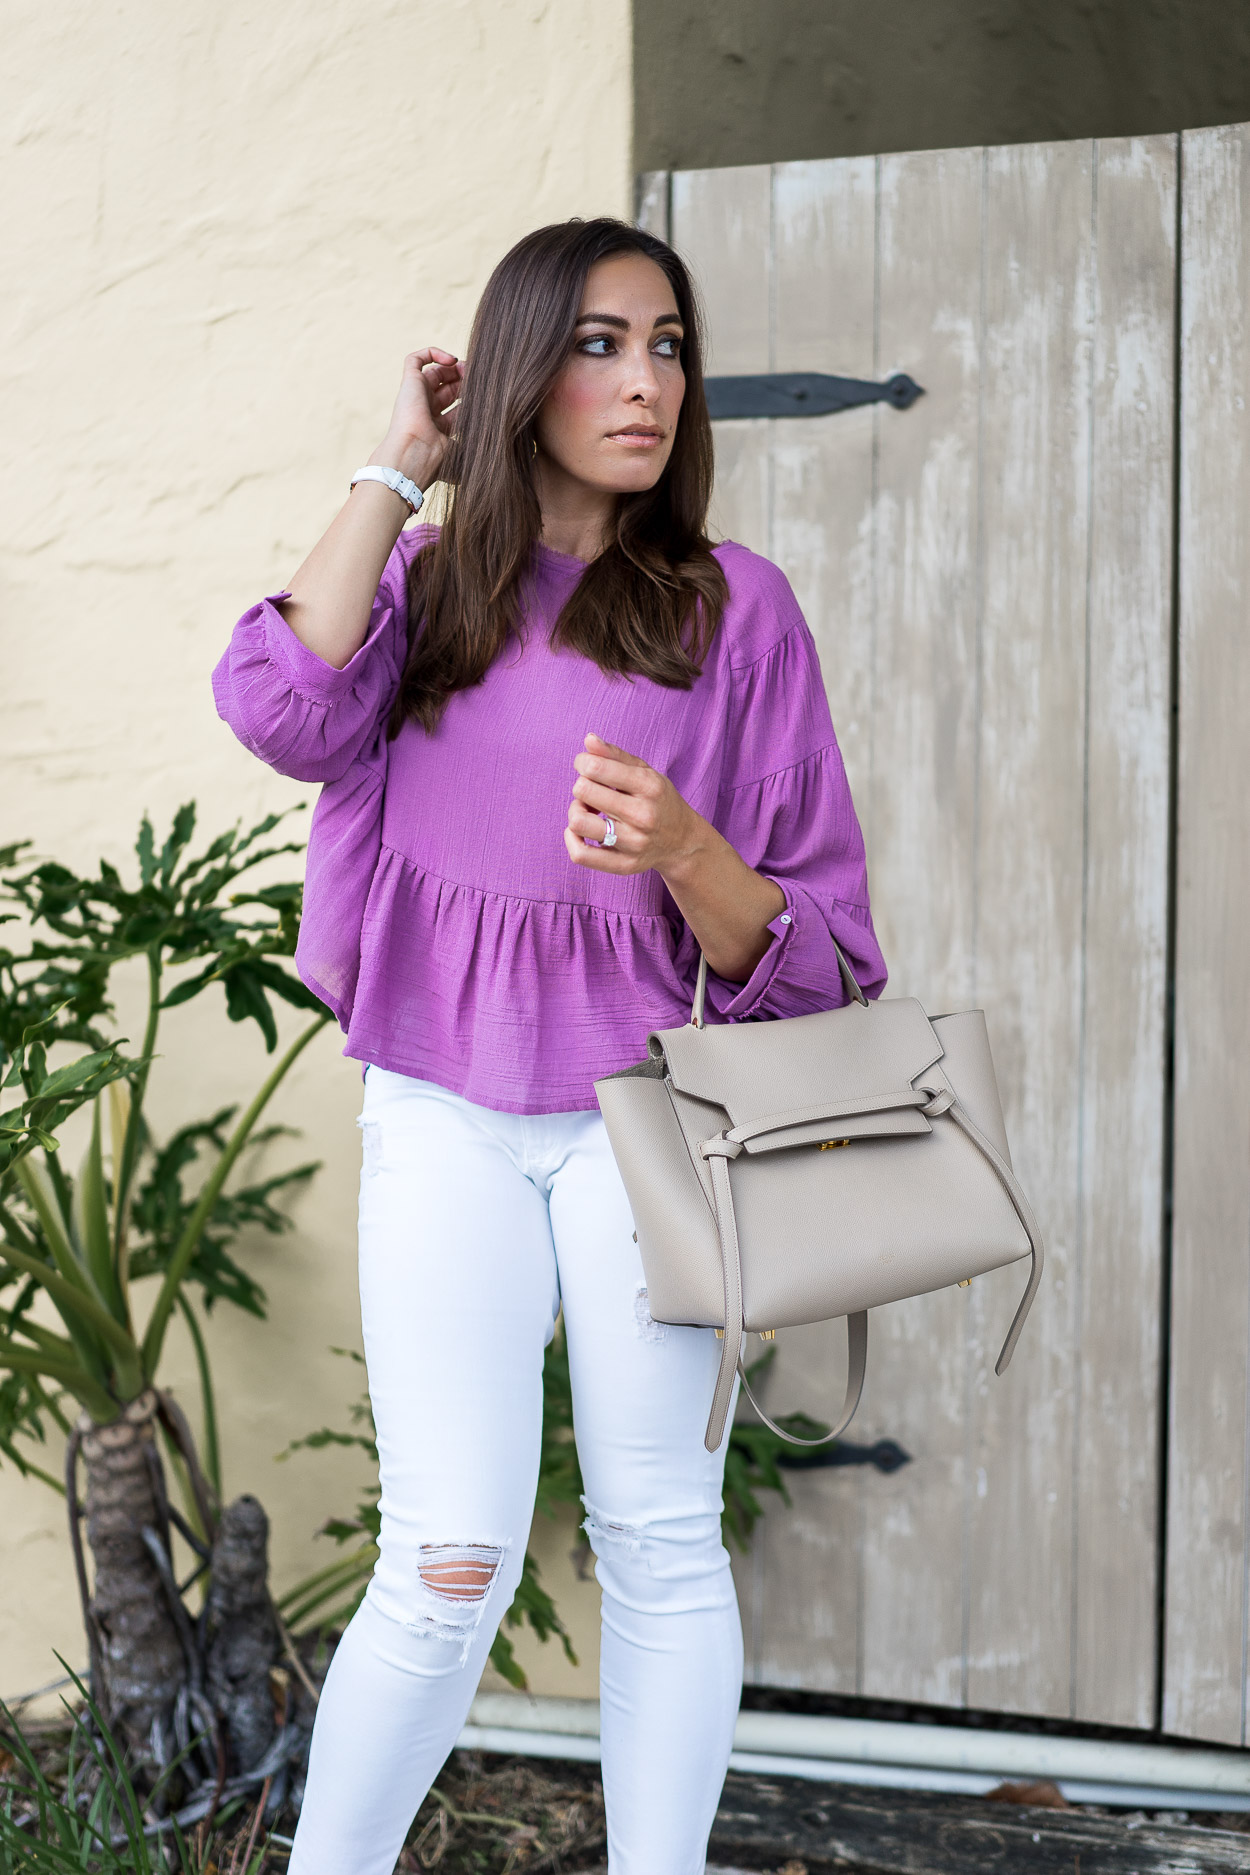 Free People boho top is a Summer must have styled by South Florida fashion blogger Amanda of A Glam Lifestyle